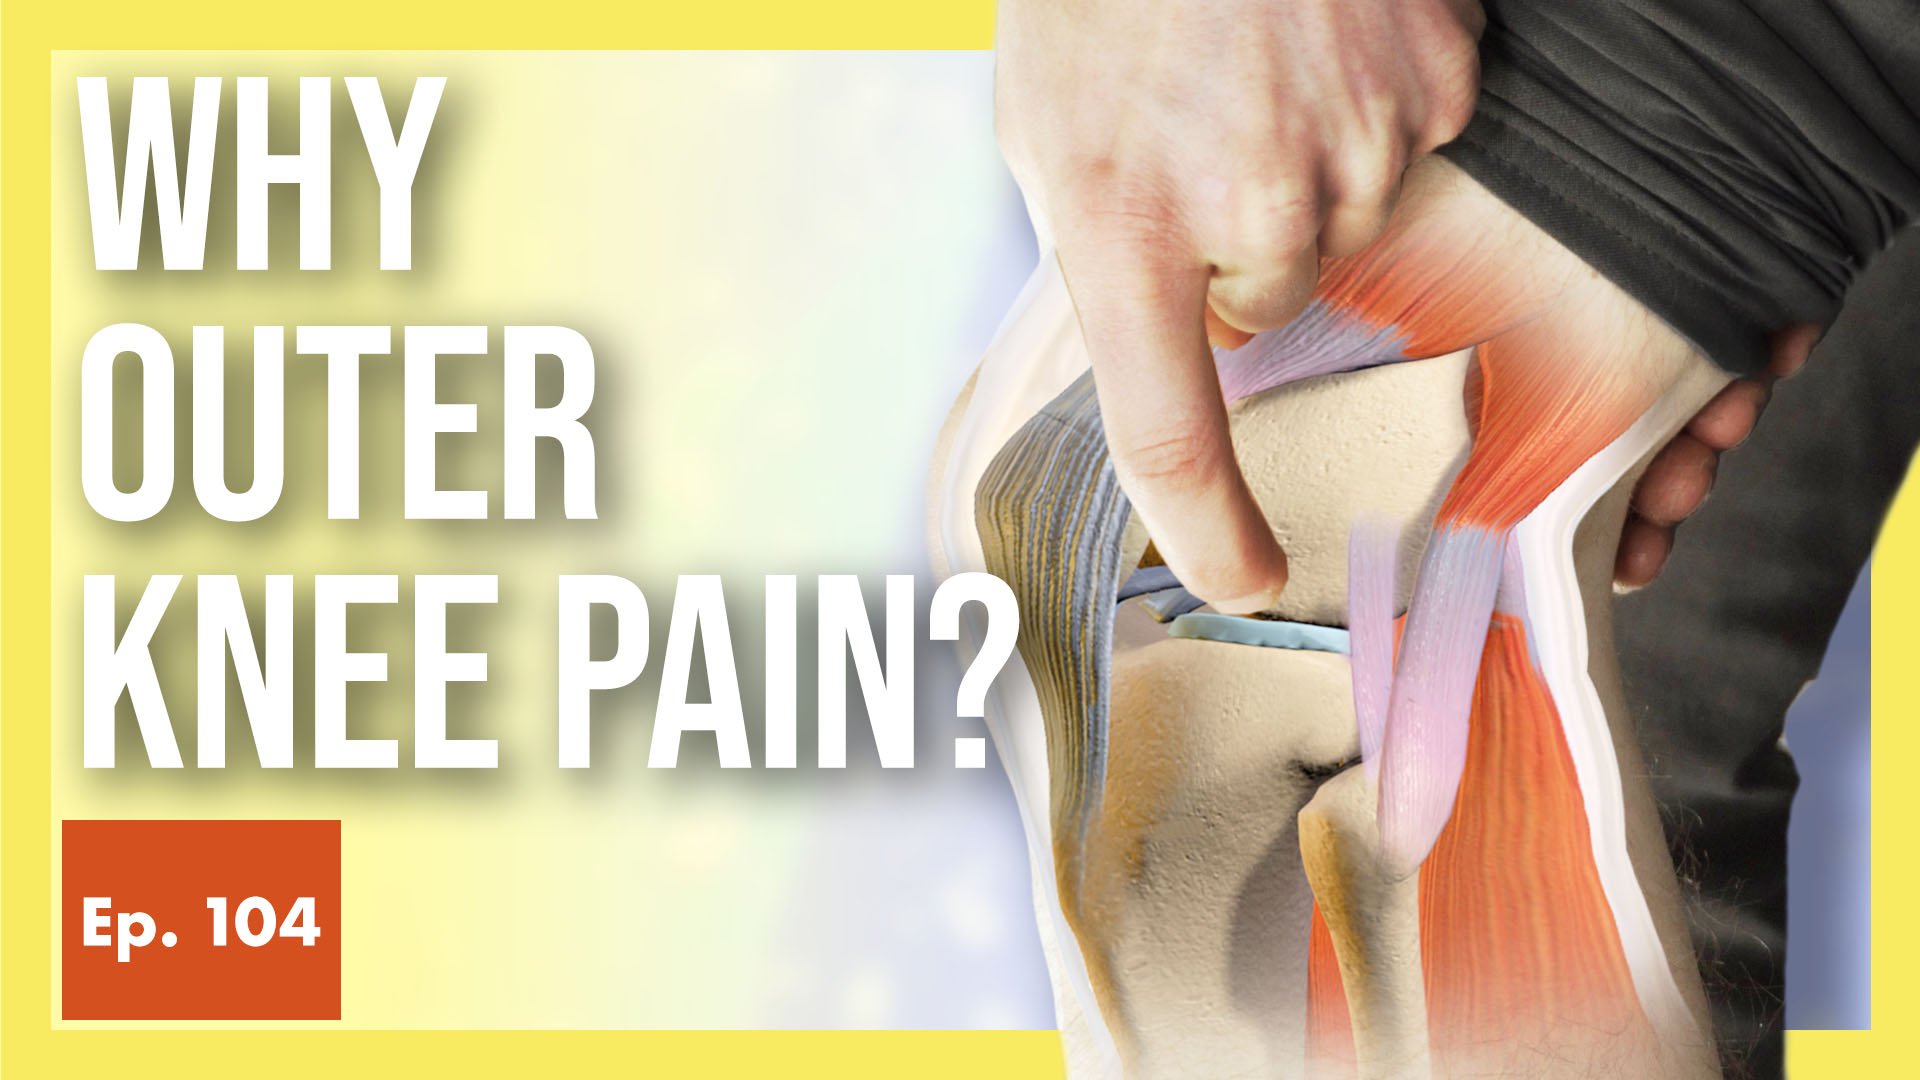 What Are the Best Exercises for Knee Pain Relief?